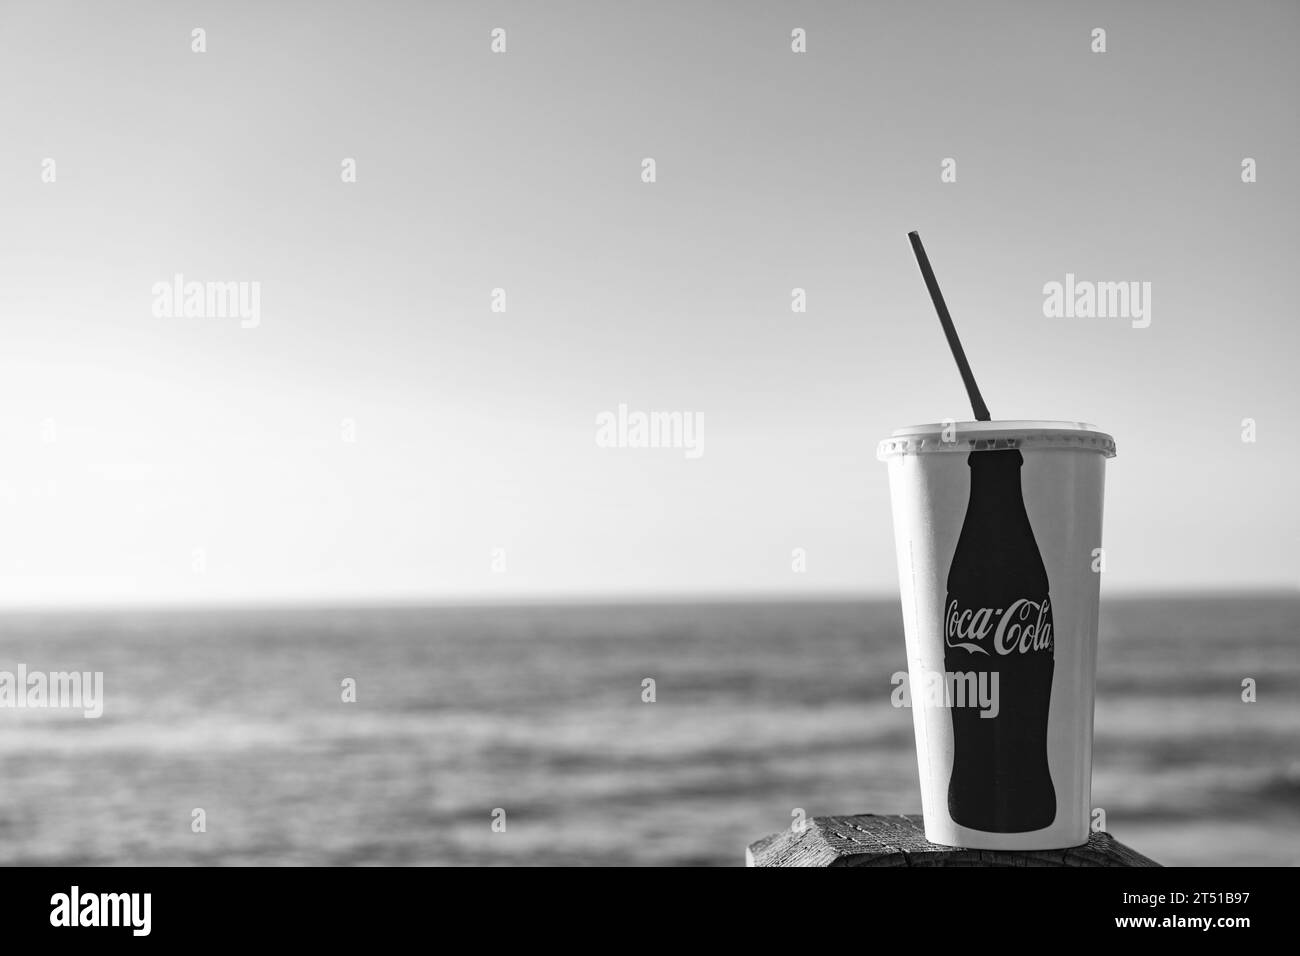 Coca cola paper cup Cut Out Stock Images & Pictures - Alamy